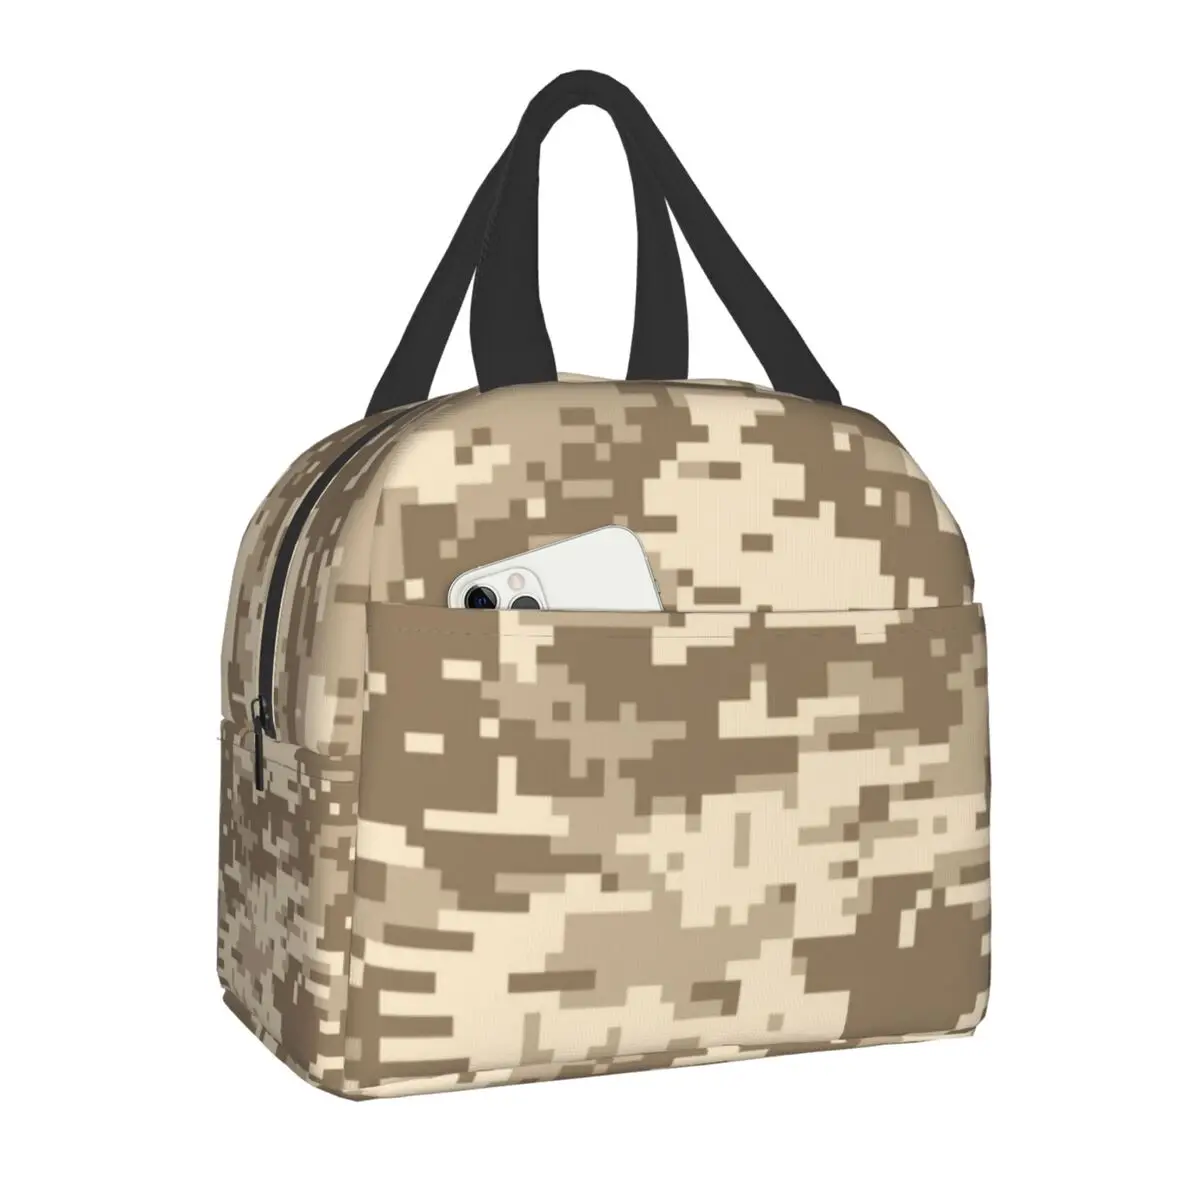 Multicam Military Camouflage Camo Insulated Lunch Tote Bag for Women Resuable Cooler Thermal Food Lunch Box School Lunch Bags